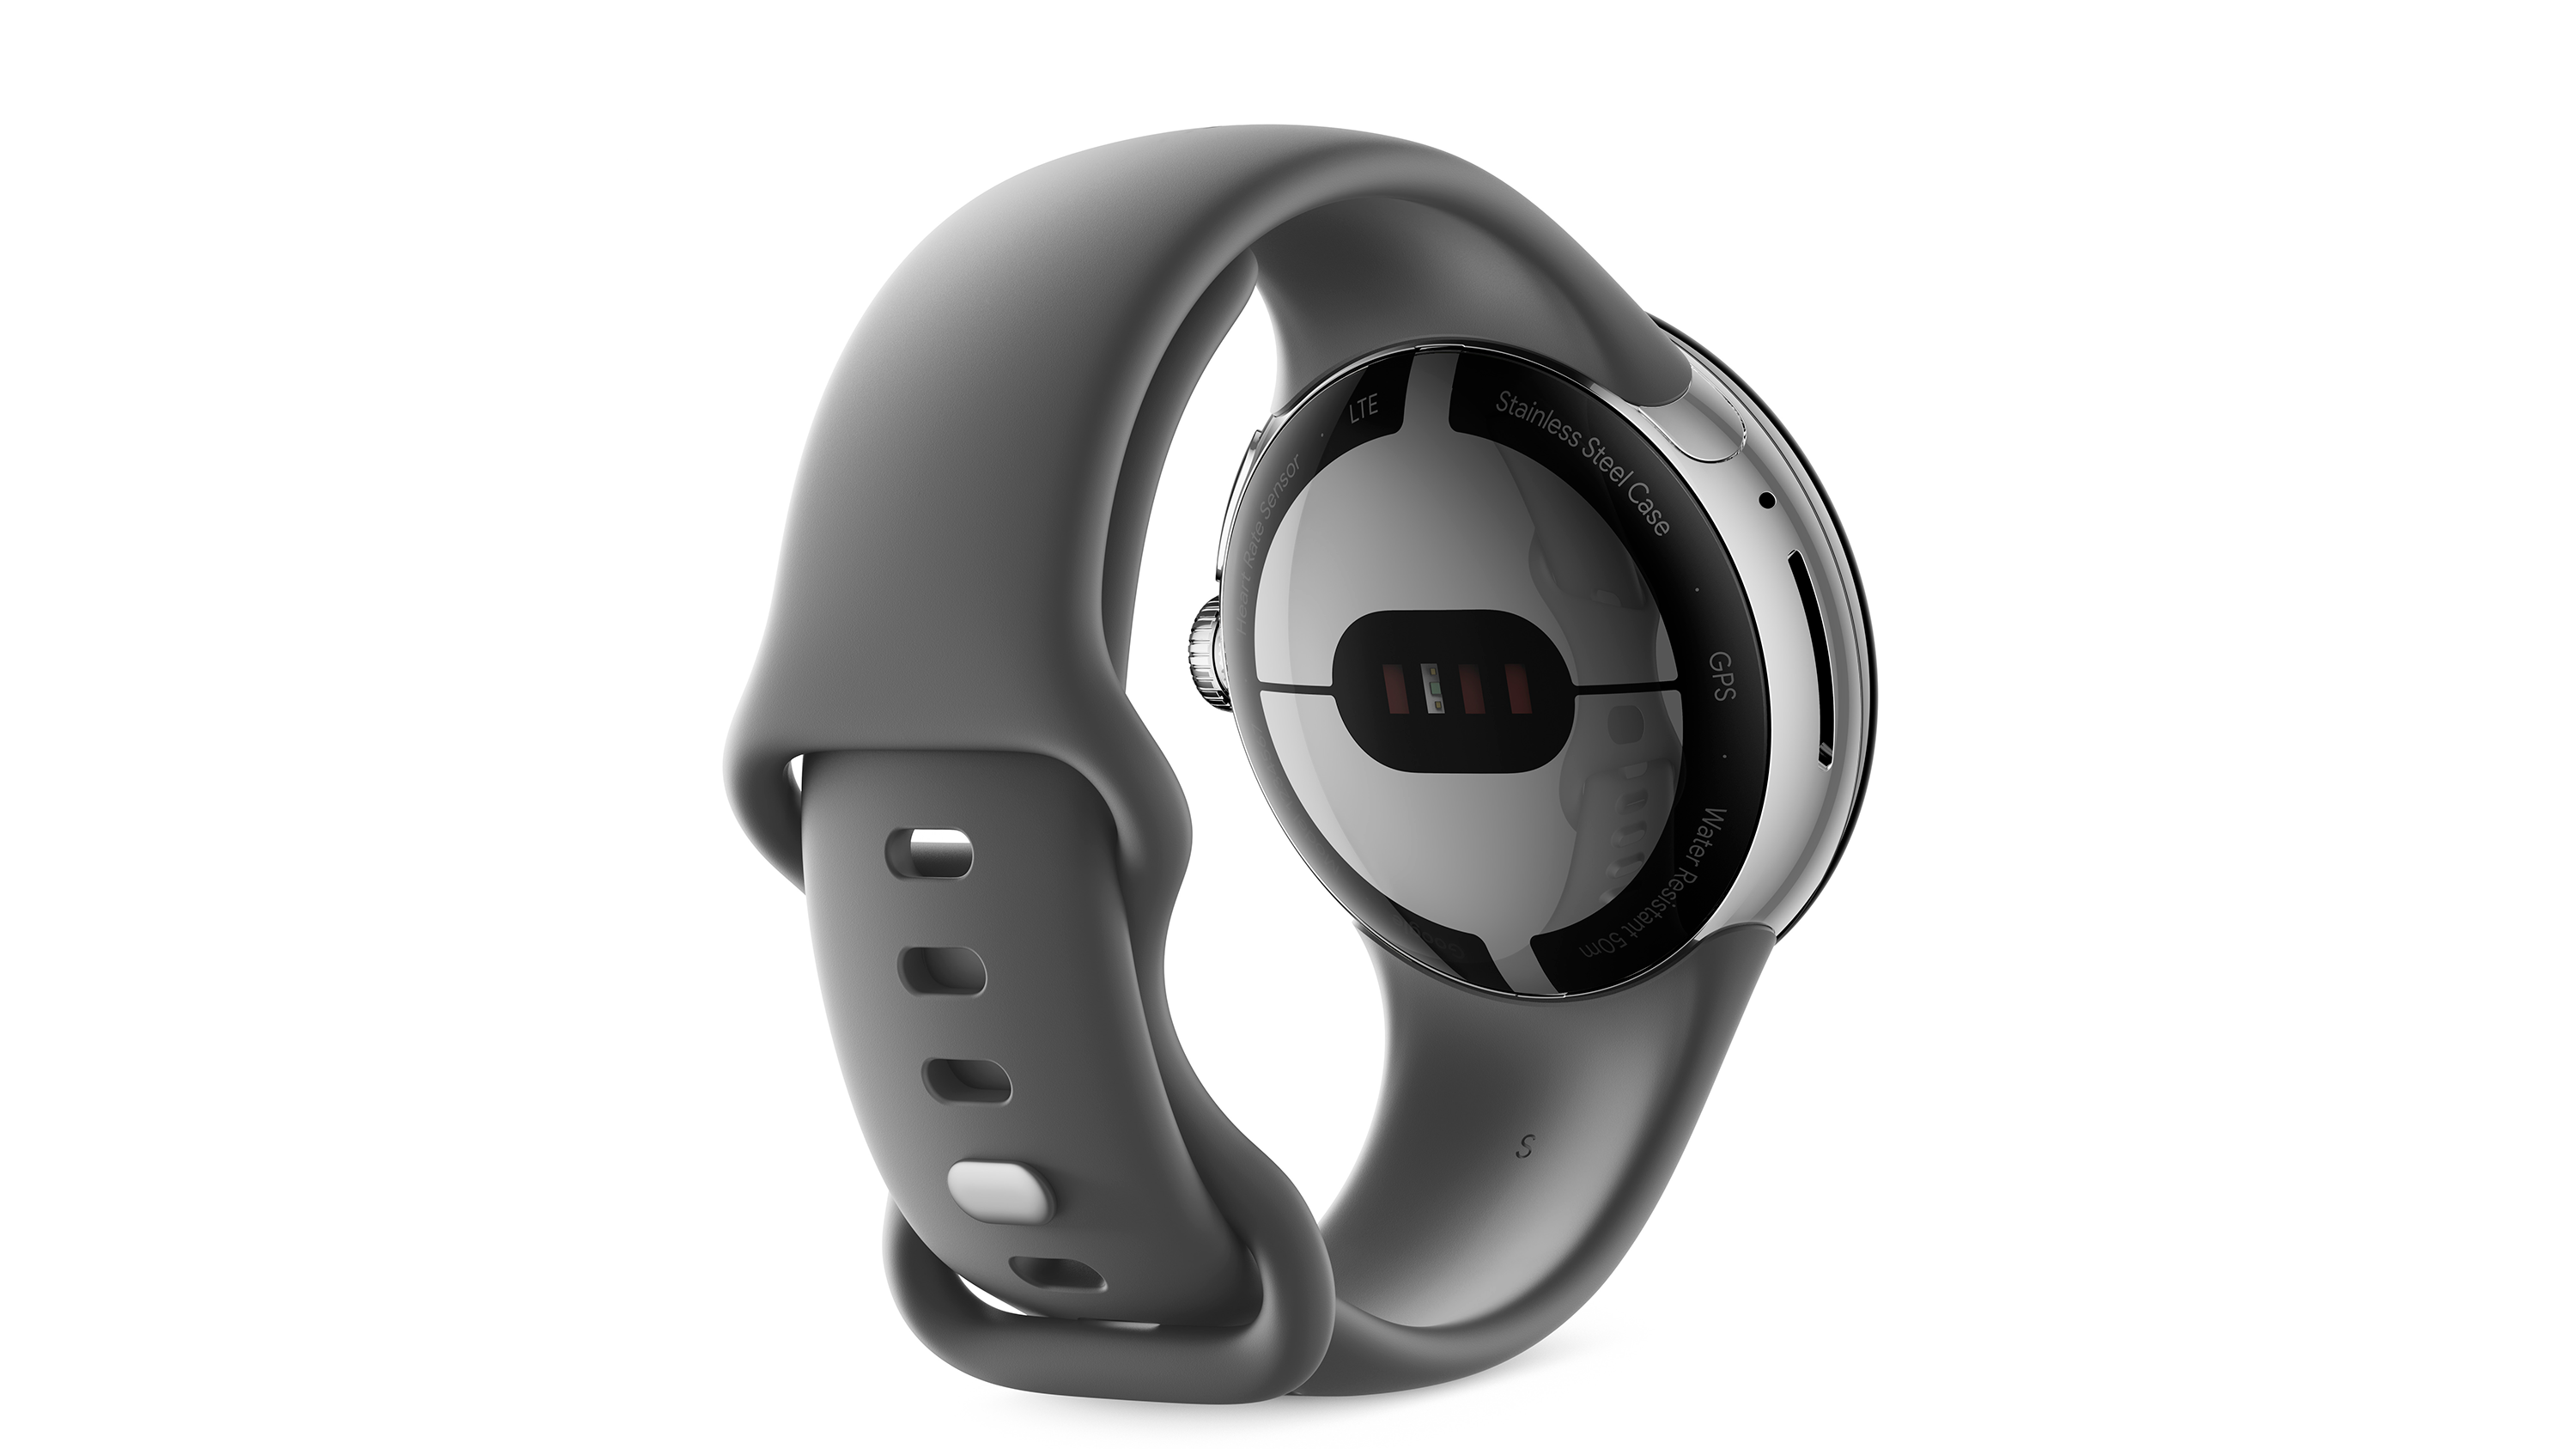 The Pixel Watch will include sensors, but we won't know the specifics until its launch later this year.  (Image: Google)